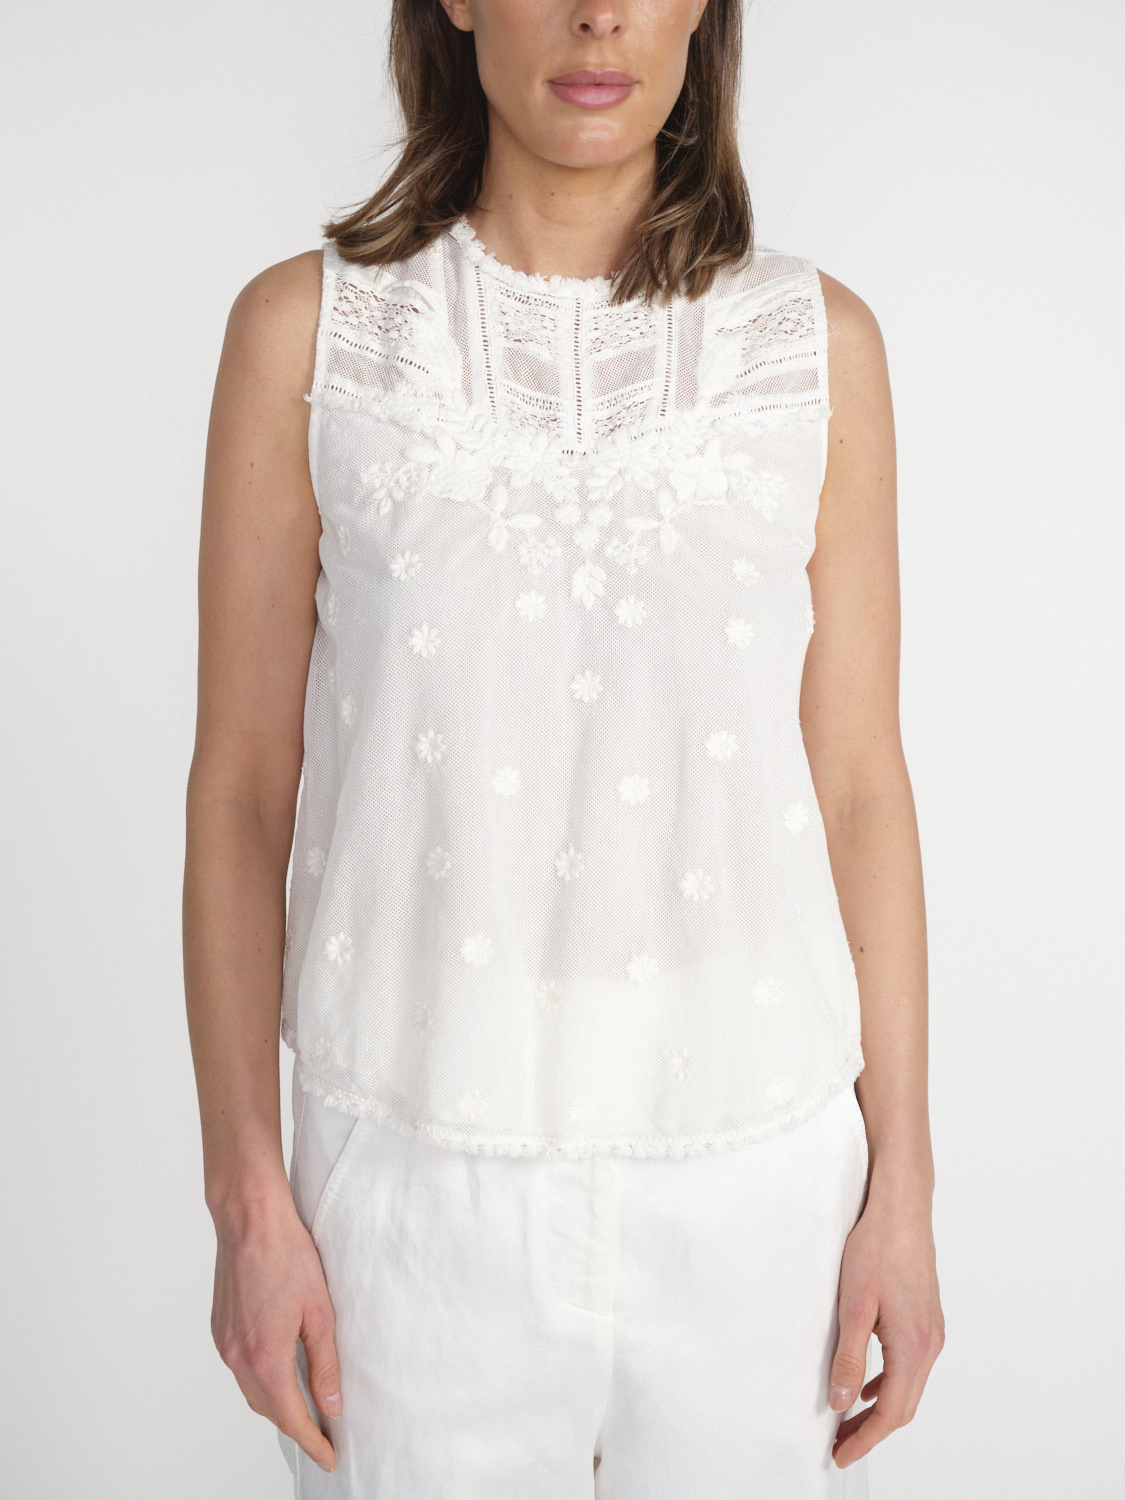 Stunning Dream – Blouse with lace 